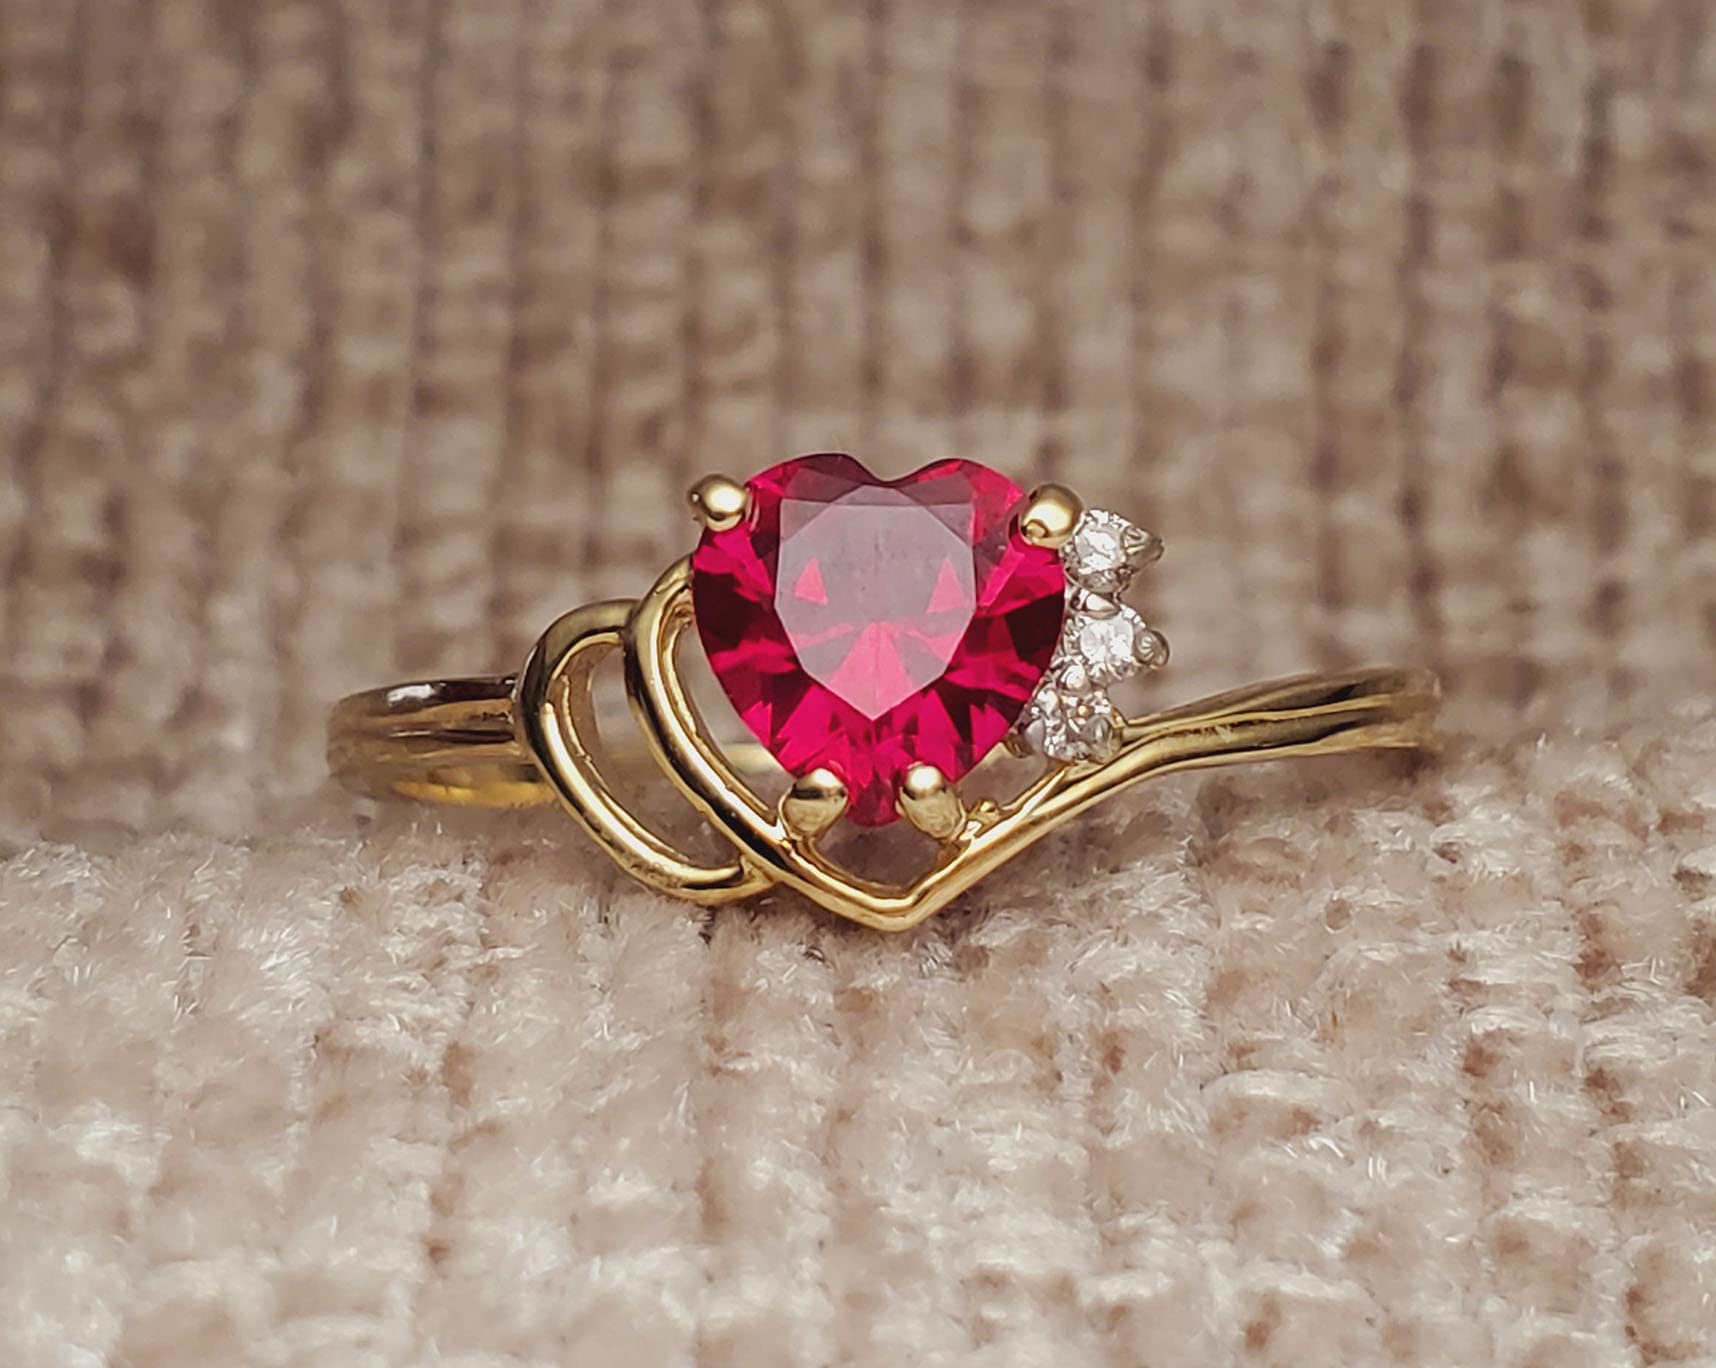 Galaxy Gold GG 1.02 ct 18K Solid Yellow Gold Heart Shaped Ruby & Diamond Ring